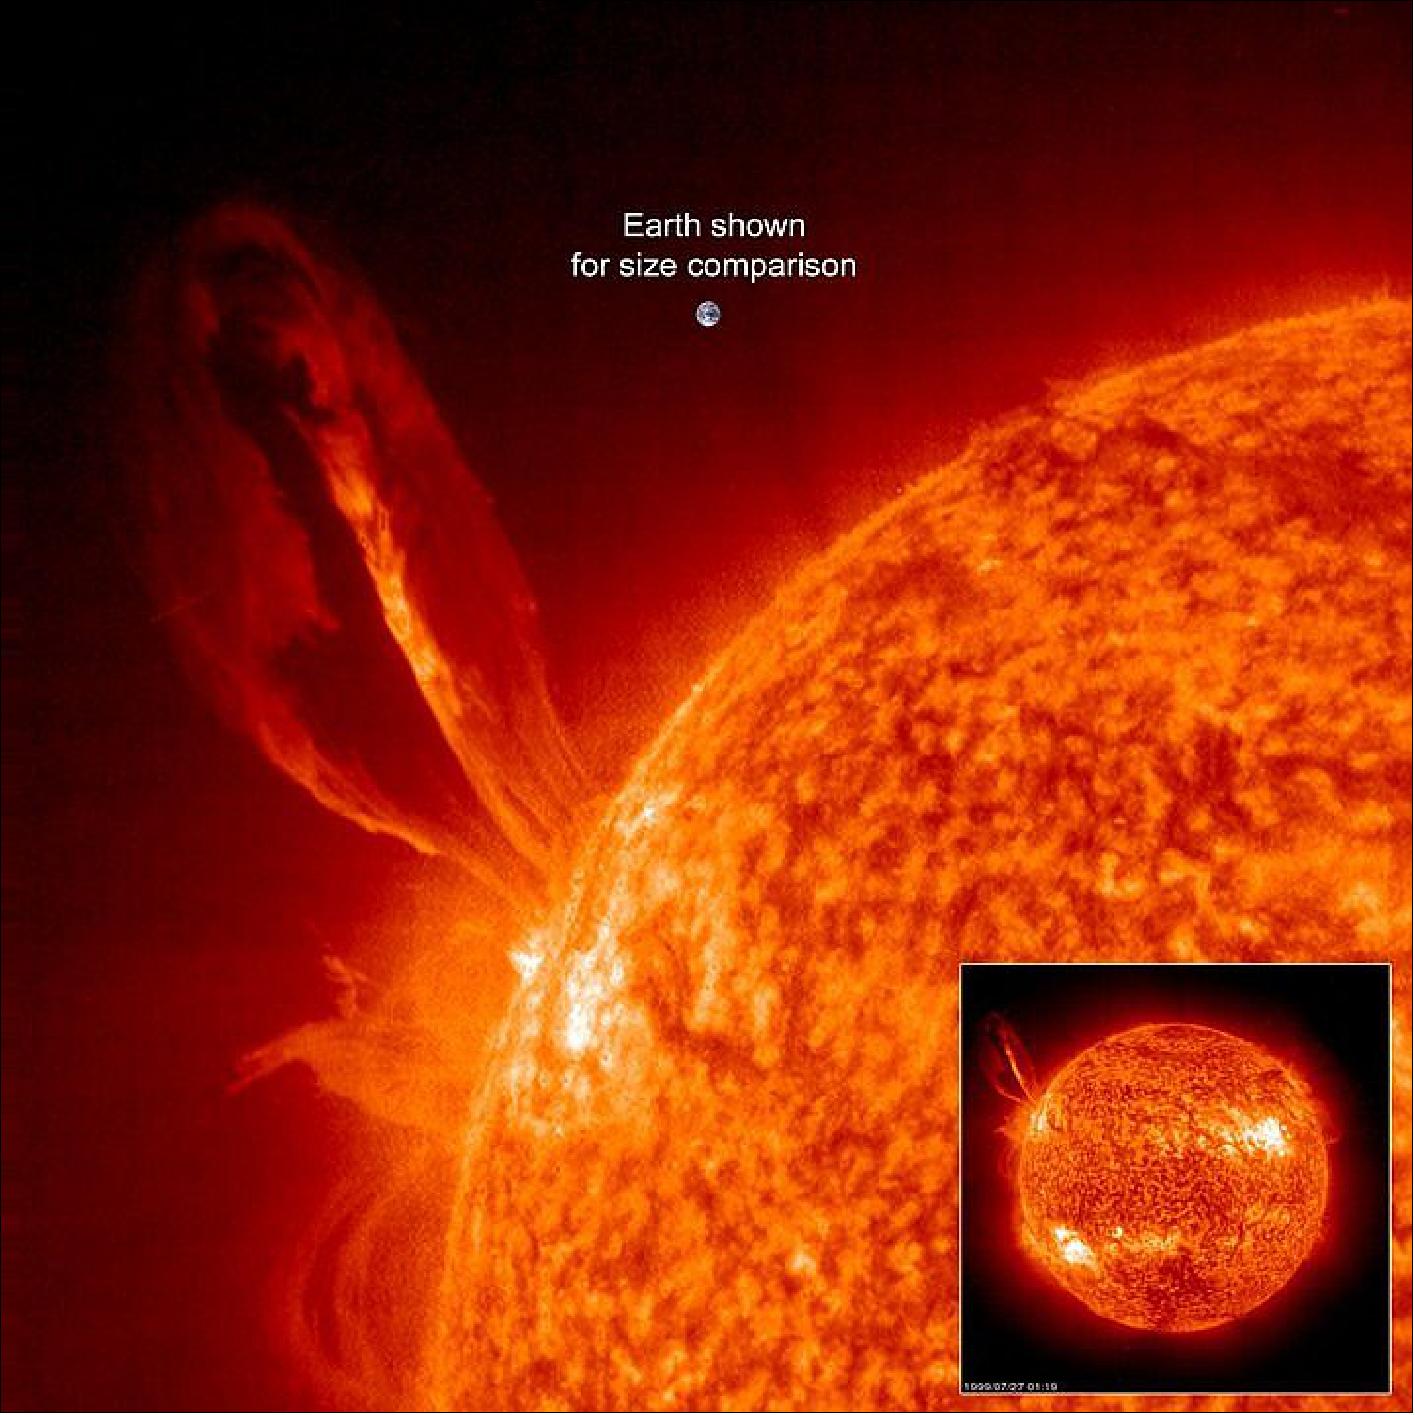 Figure 42: Solar eruption larger than Earth. A giant flare suffered by our Sun, captured on 27 July 1999 by the EIT (Extreme ultraviolet Imaging Telescope) on SOHO (Solar and Heliospheric Observatory), this image shows ionized helium at a temperature of about 70,000ºC (image credit: SOHO, ESA/NASA)